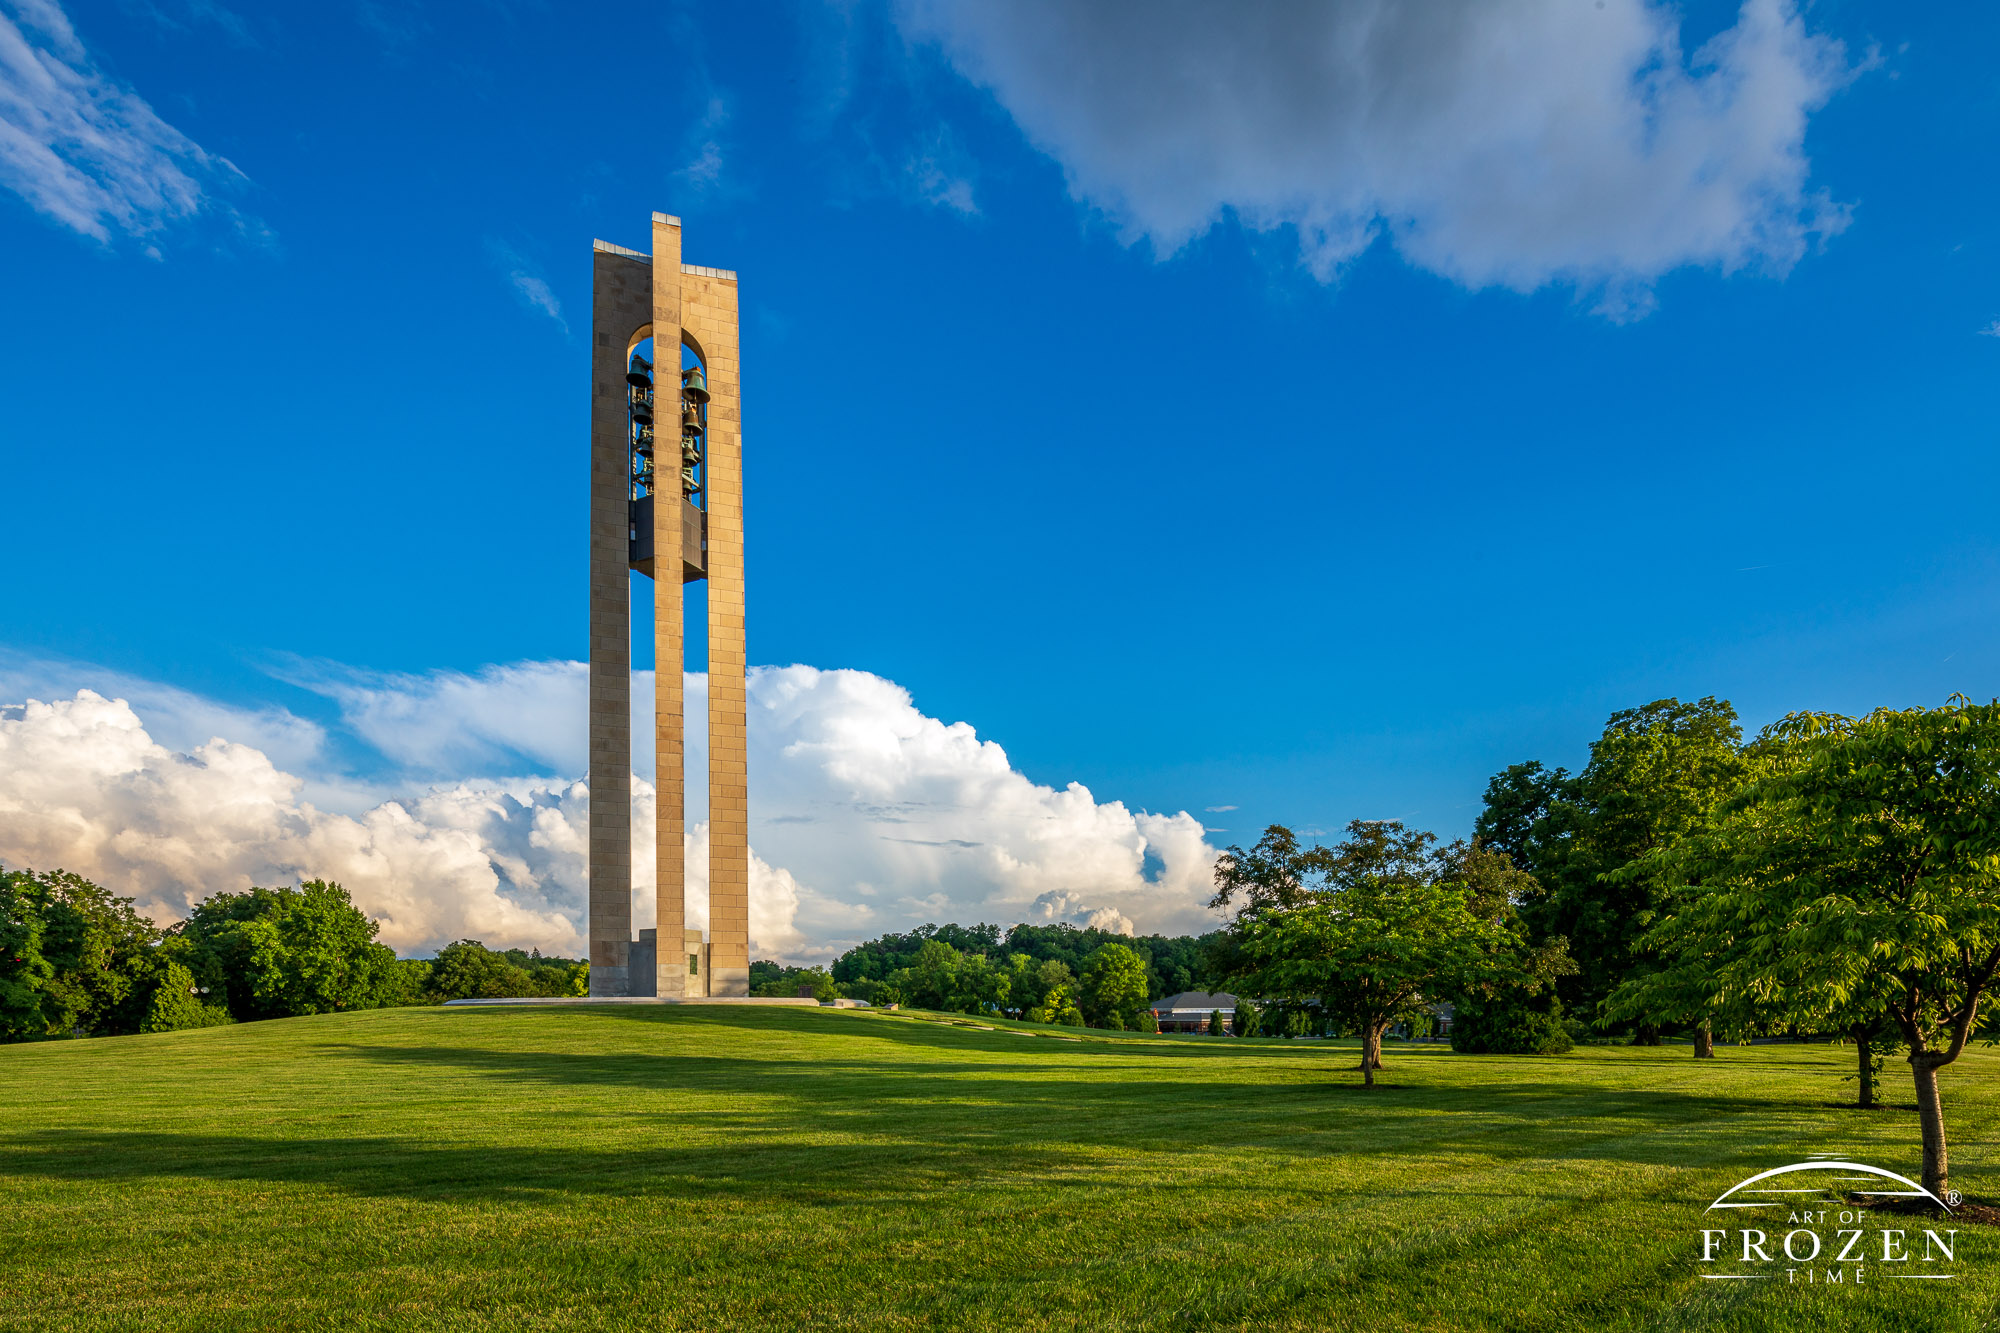 Deeds Carillon takes on warmer colors in this golden hour view of Dayton's Bell Tower as distant storms linger on the horizon making for awesome Dayton Fine Art Photography